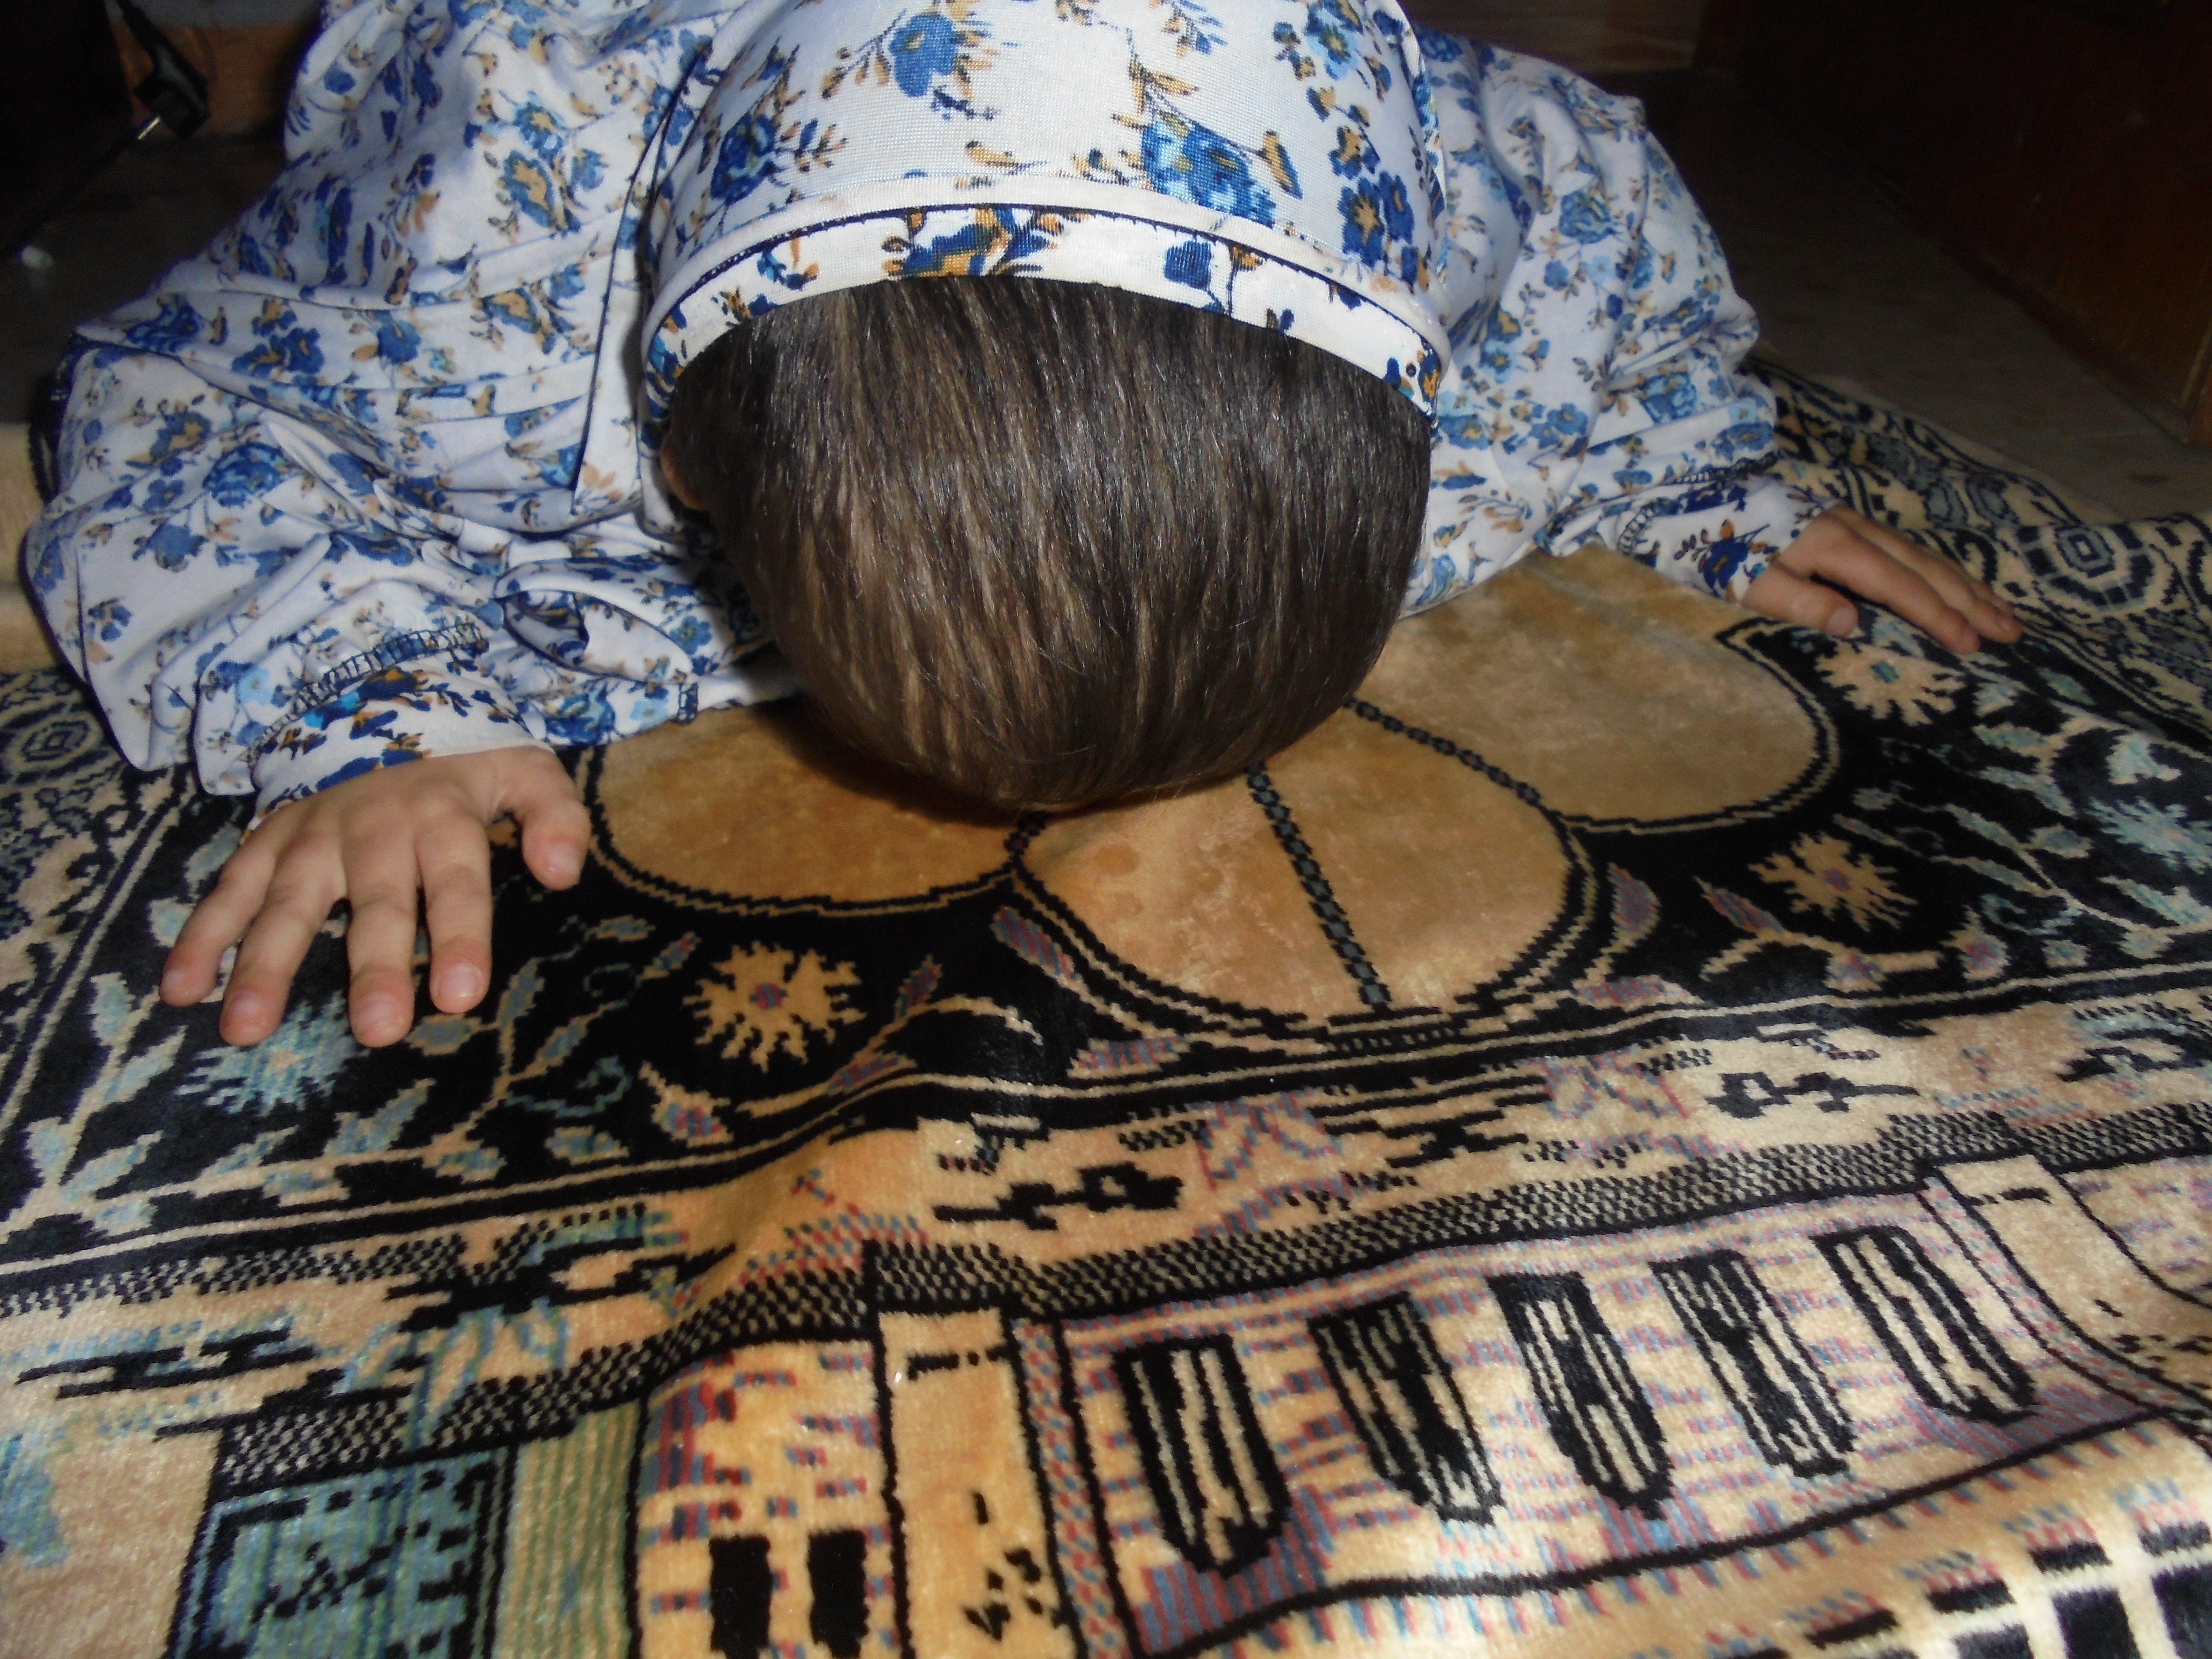 A young participant on the project, praying on the prayer mat, face down.